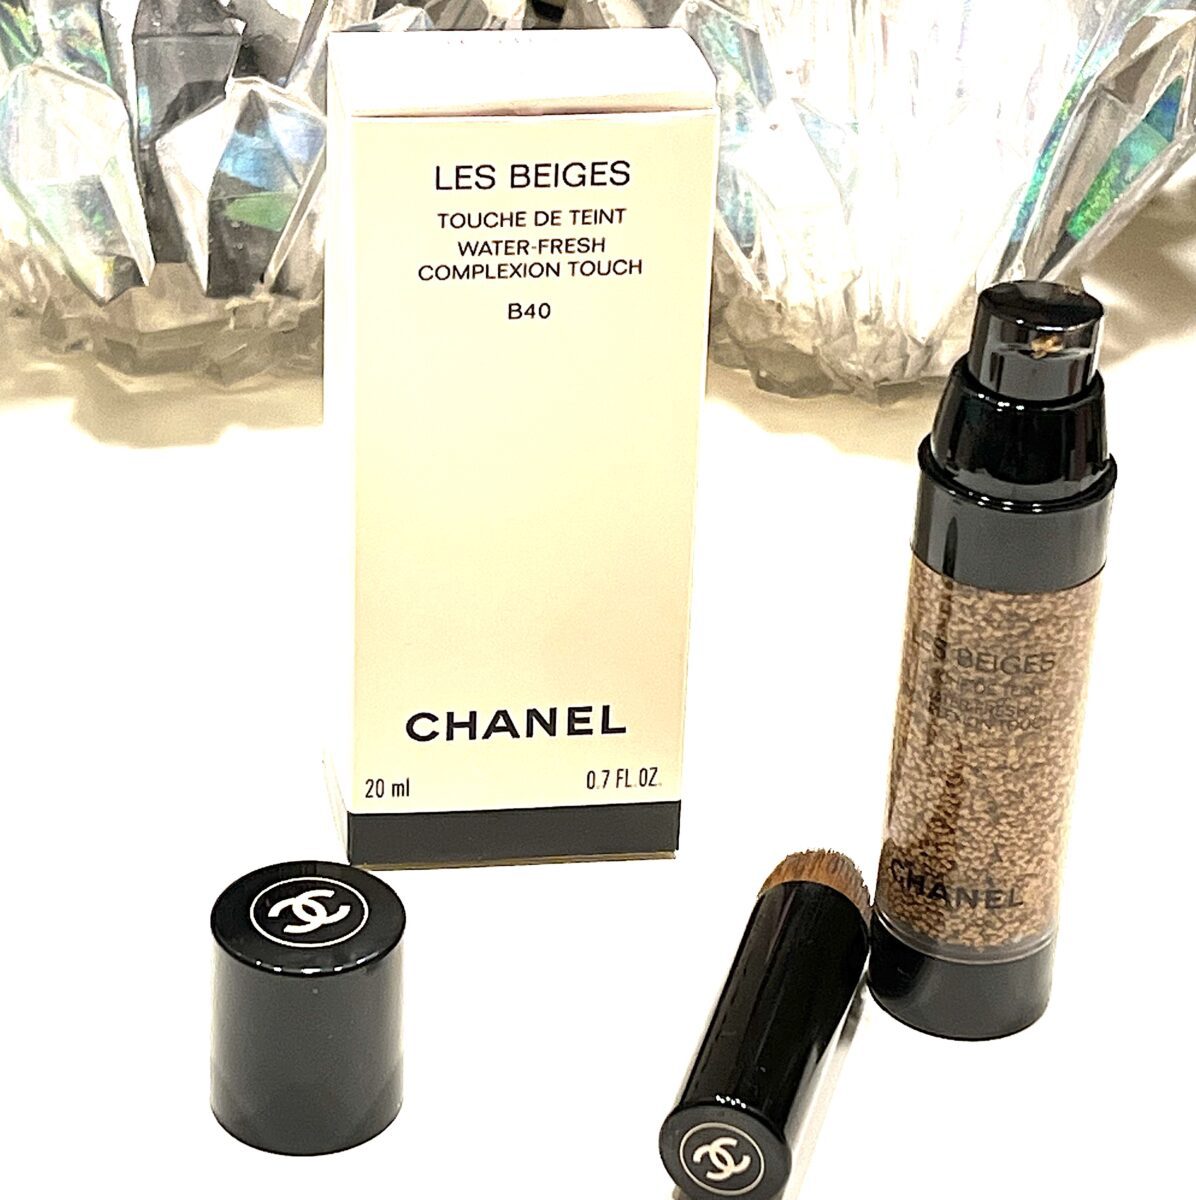 Chanel Les Beiges Water Tint Review! 12 Days of Foundation Day 11 